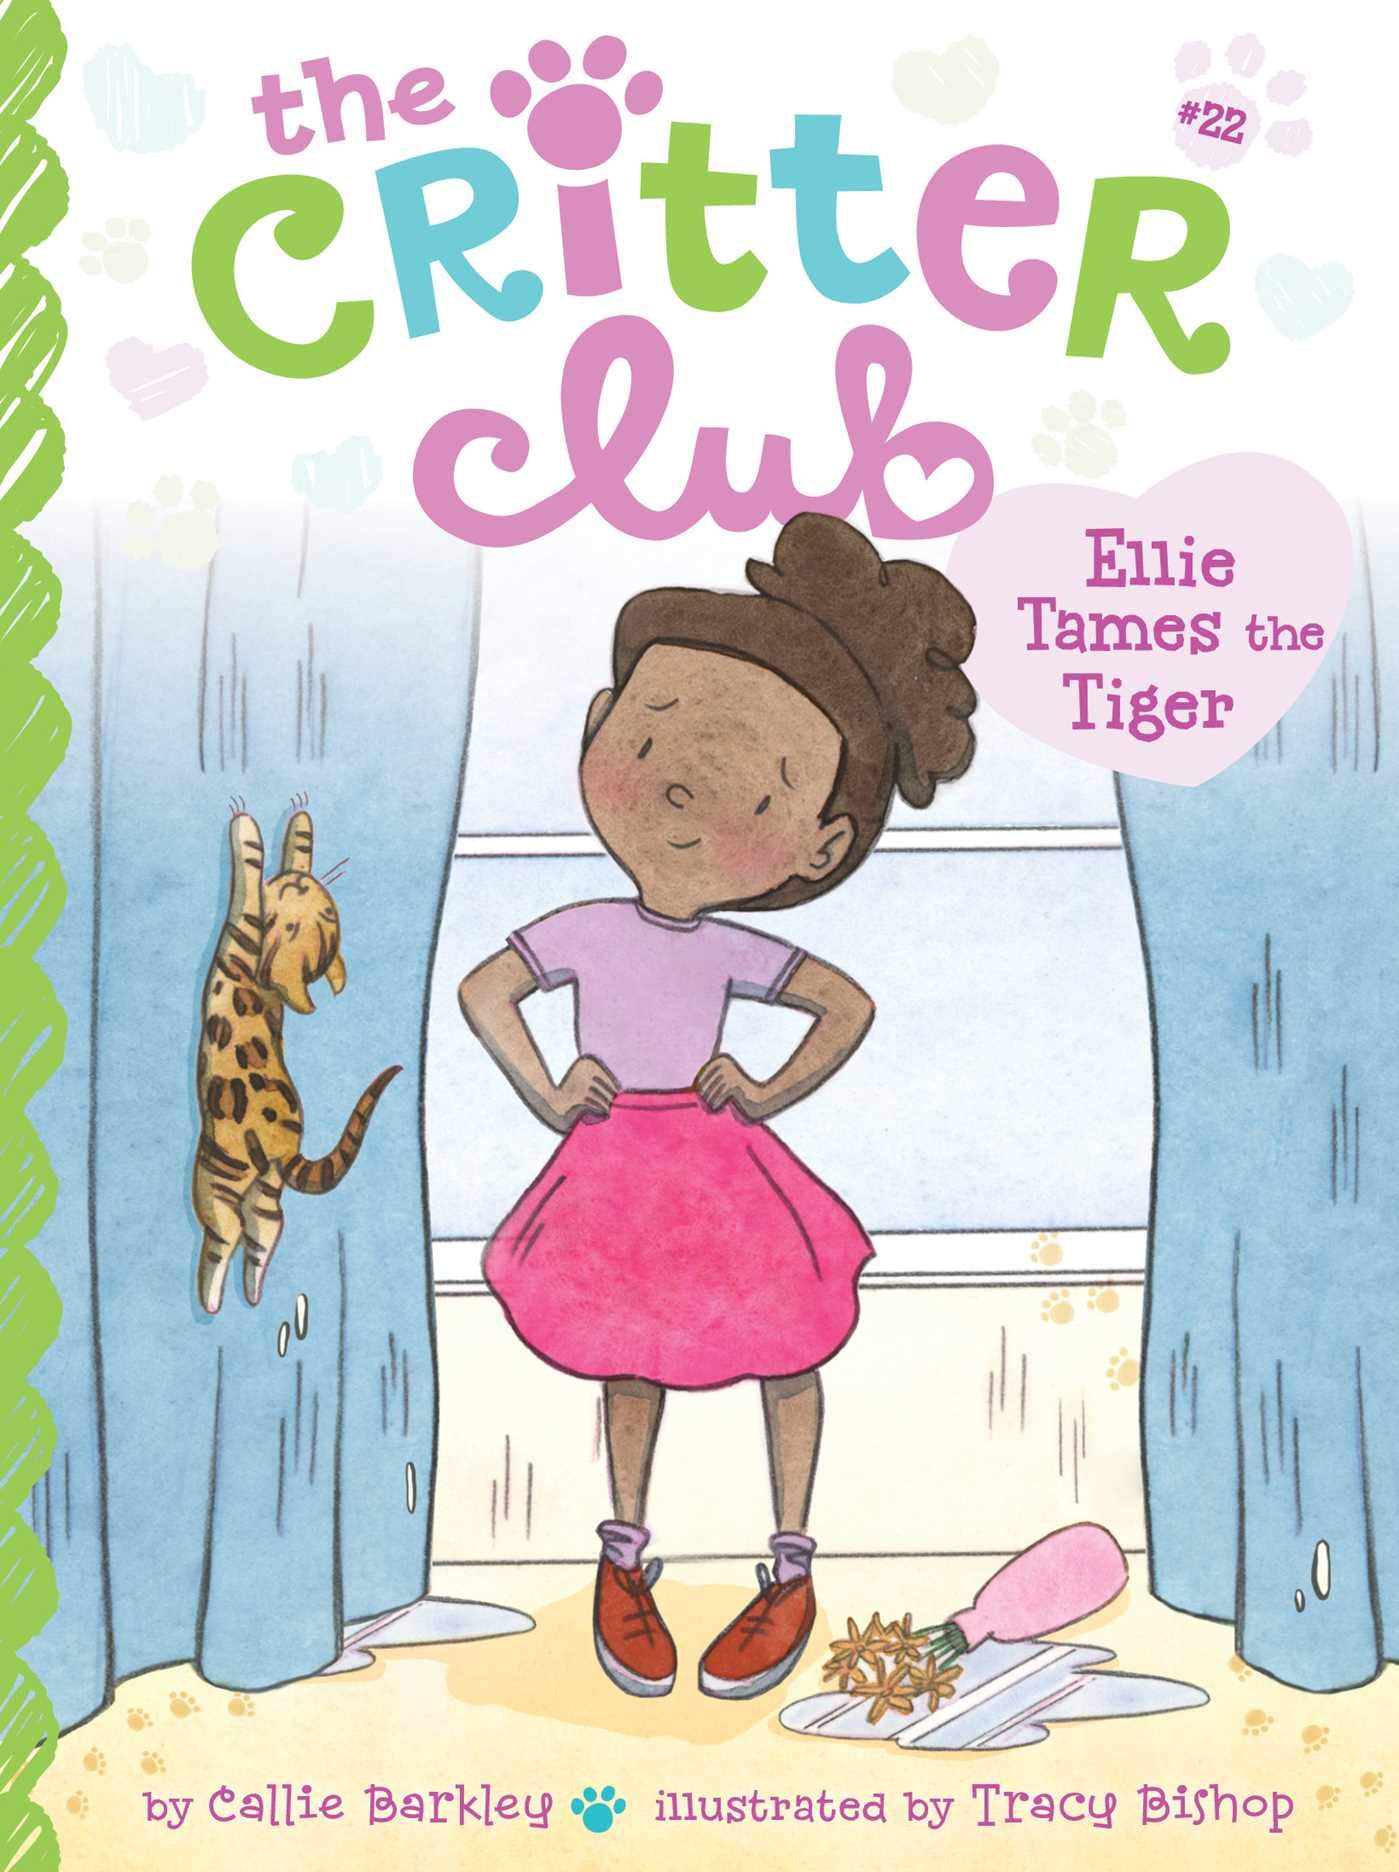 cover of "ellie tames the tiger"